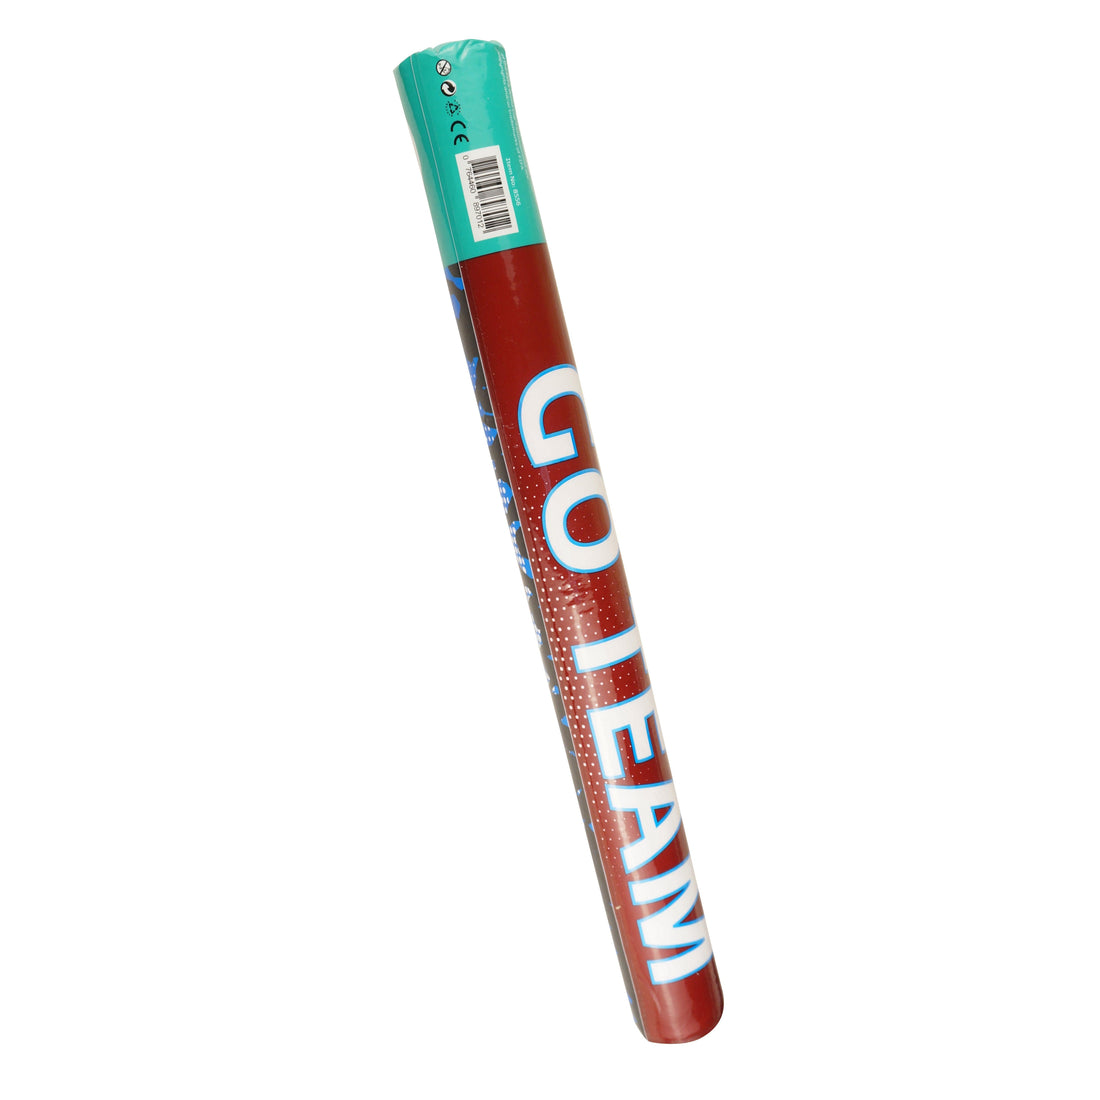  Themed 16 inch colored LED light up glow stick for cheering and celebration - My Little Thieves